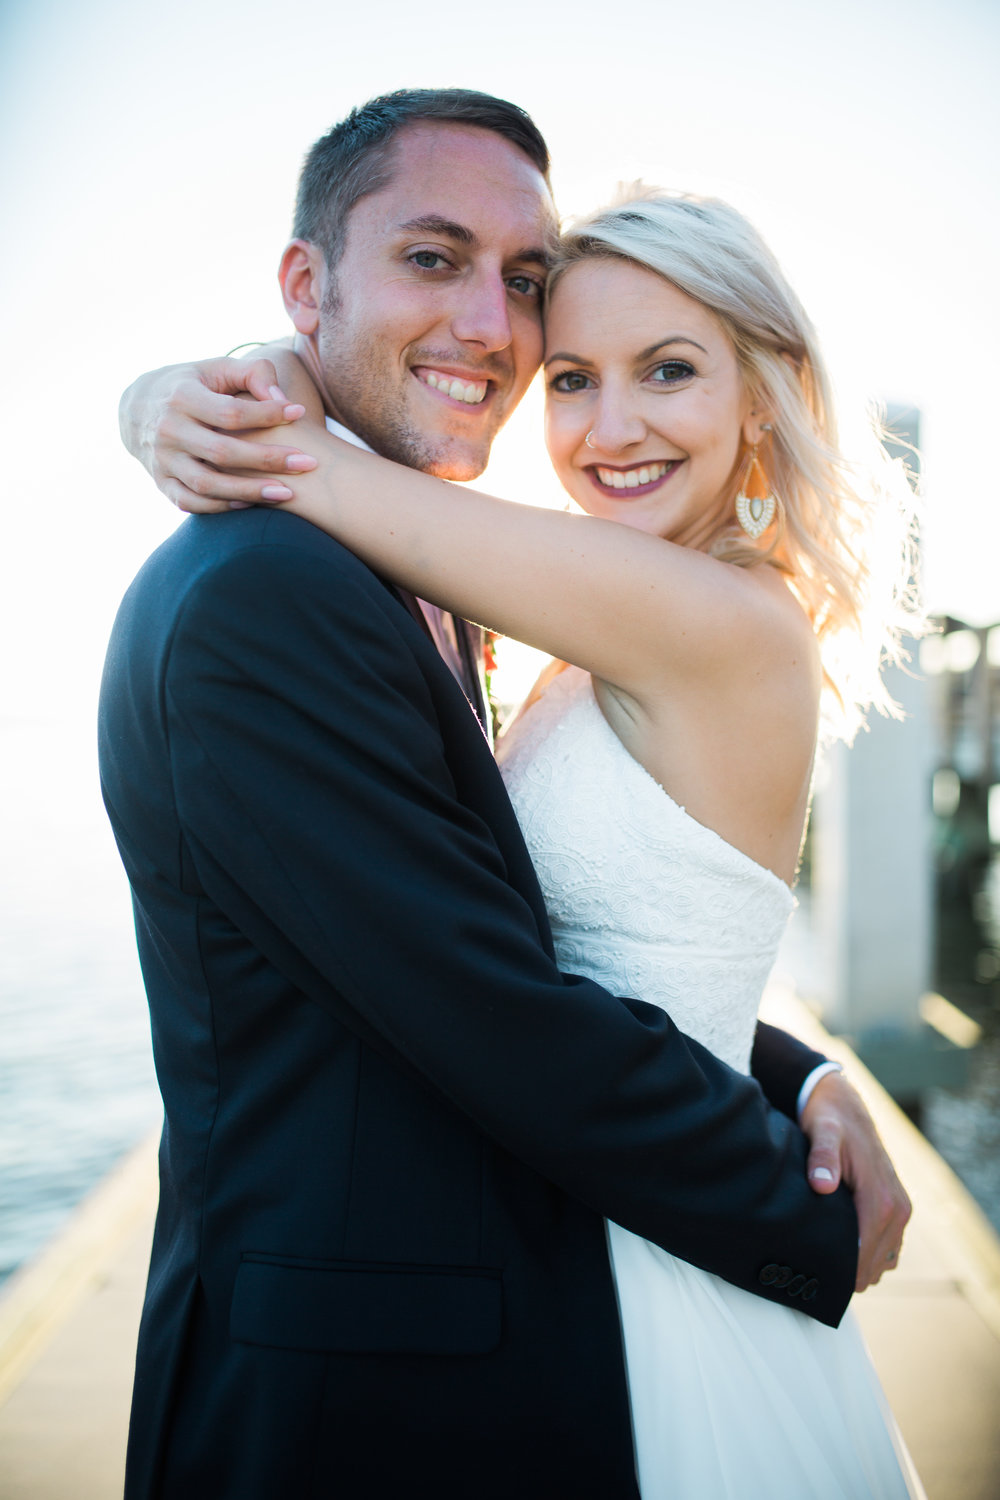 Smiling Bride and Groom with arms around each other